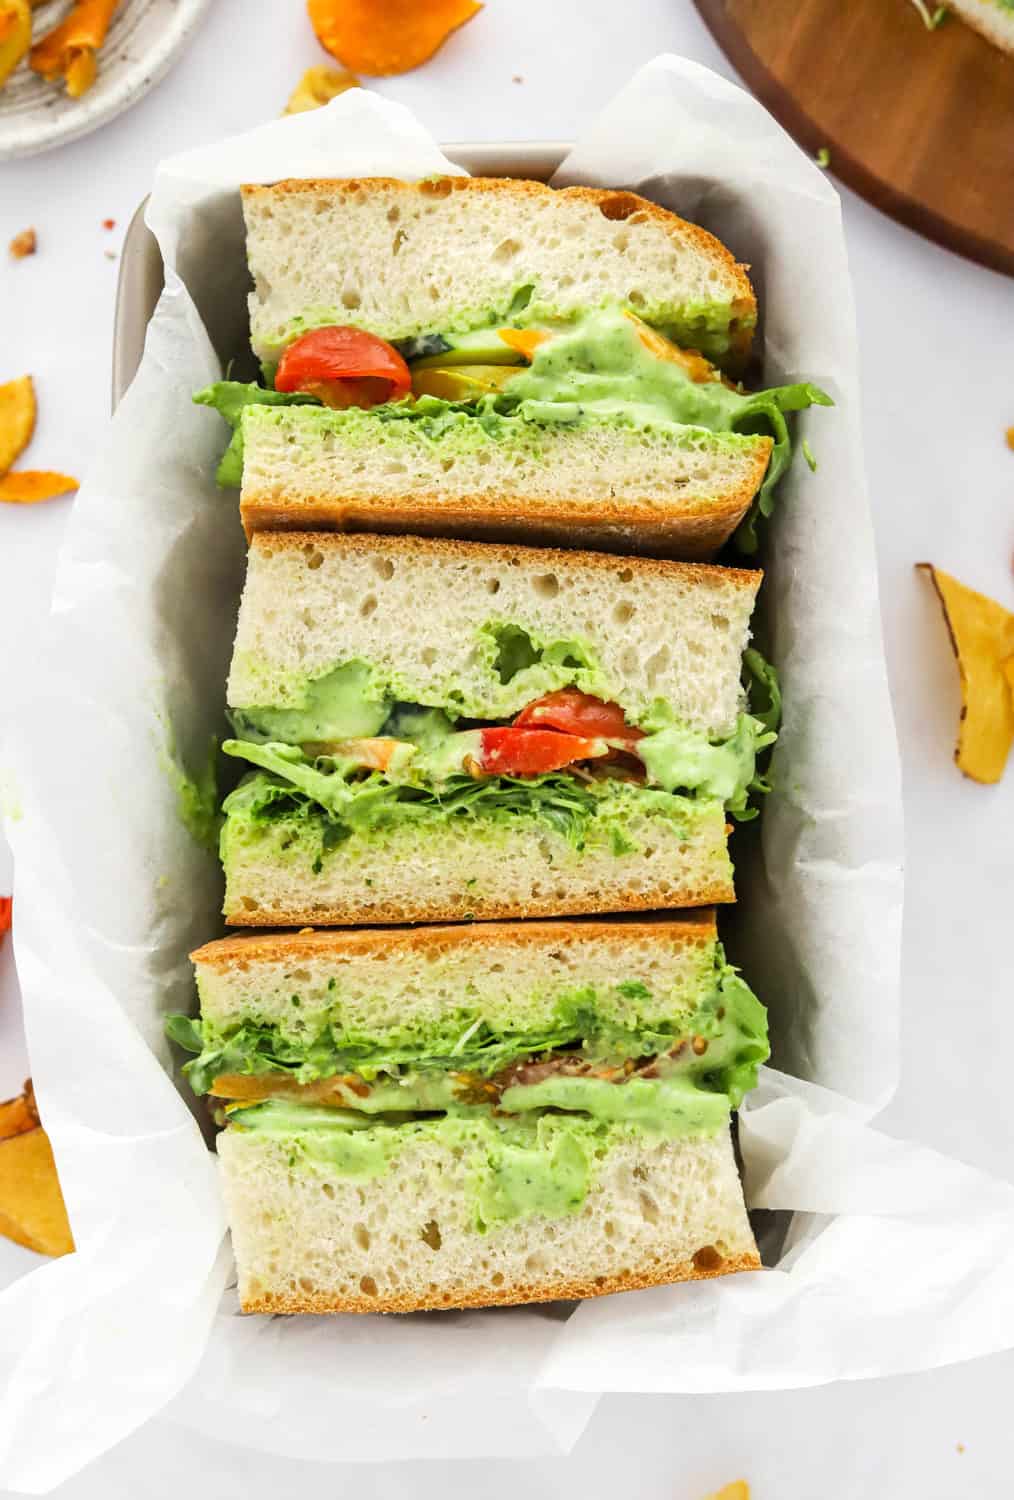 Three sandwiches in a tray on sliced ciabatta bread with a creamy green dressing and veggies in between the slices of bread.